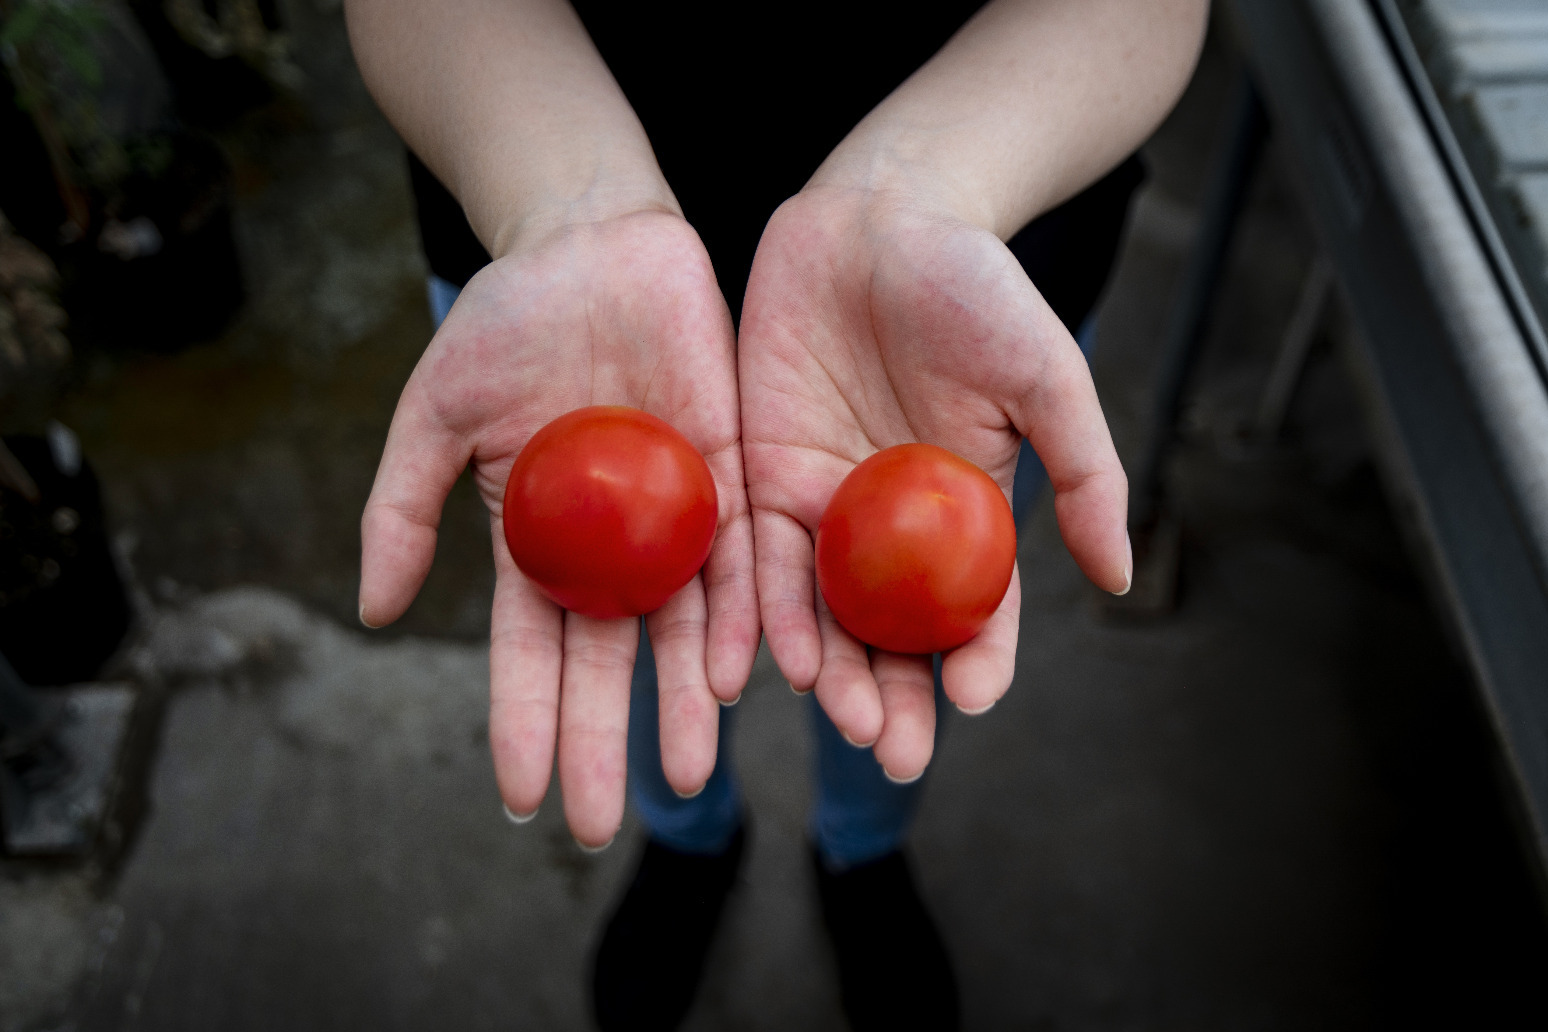 Consumers should see ‘significant volumes’ of British tomatoes by end of March 